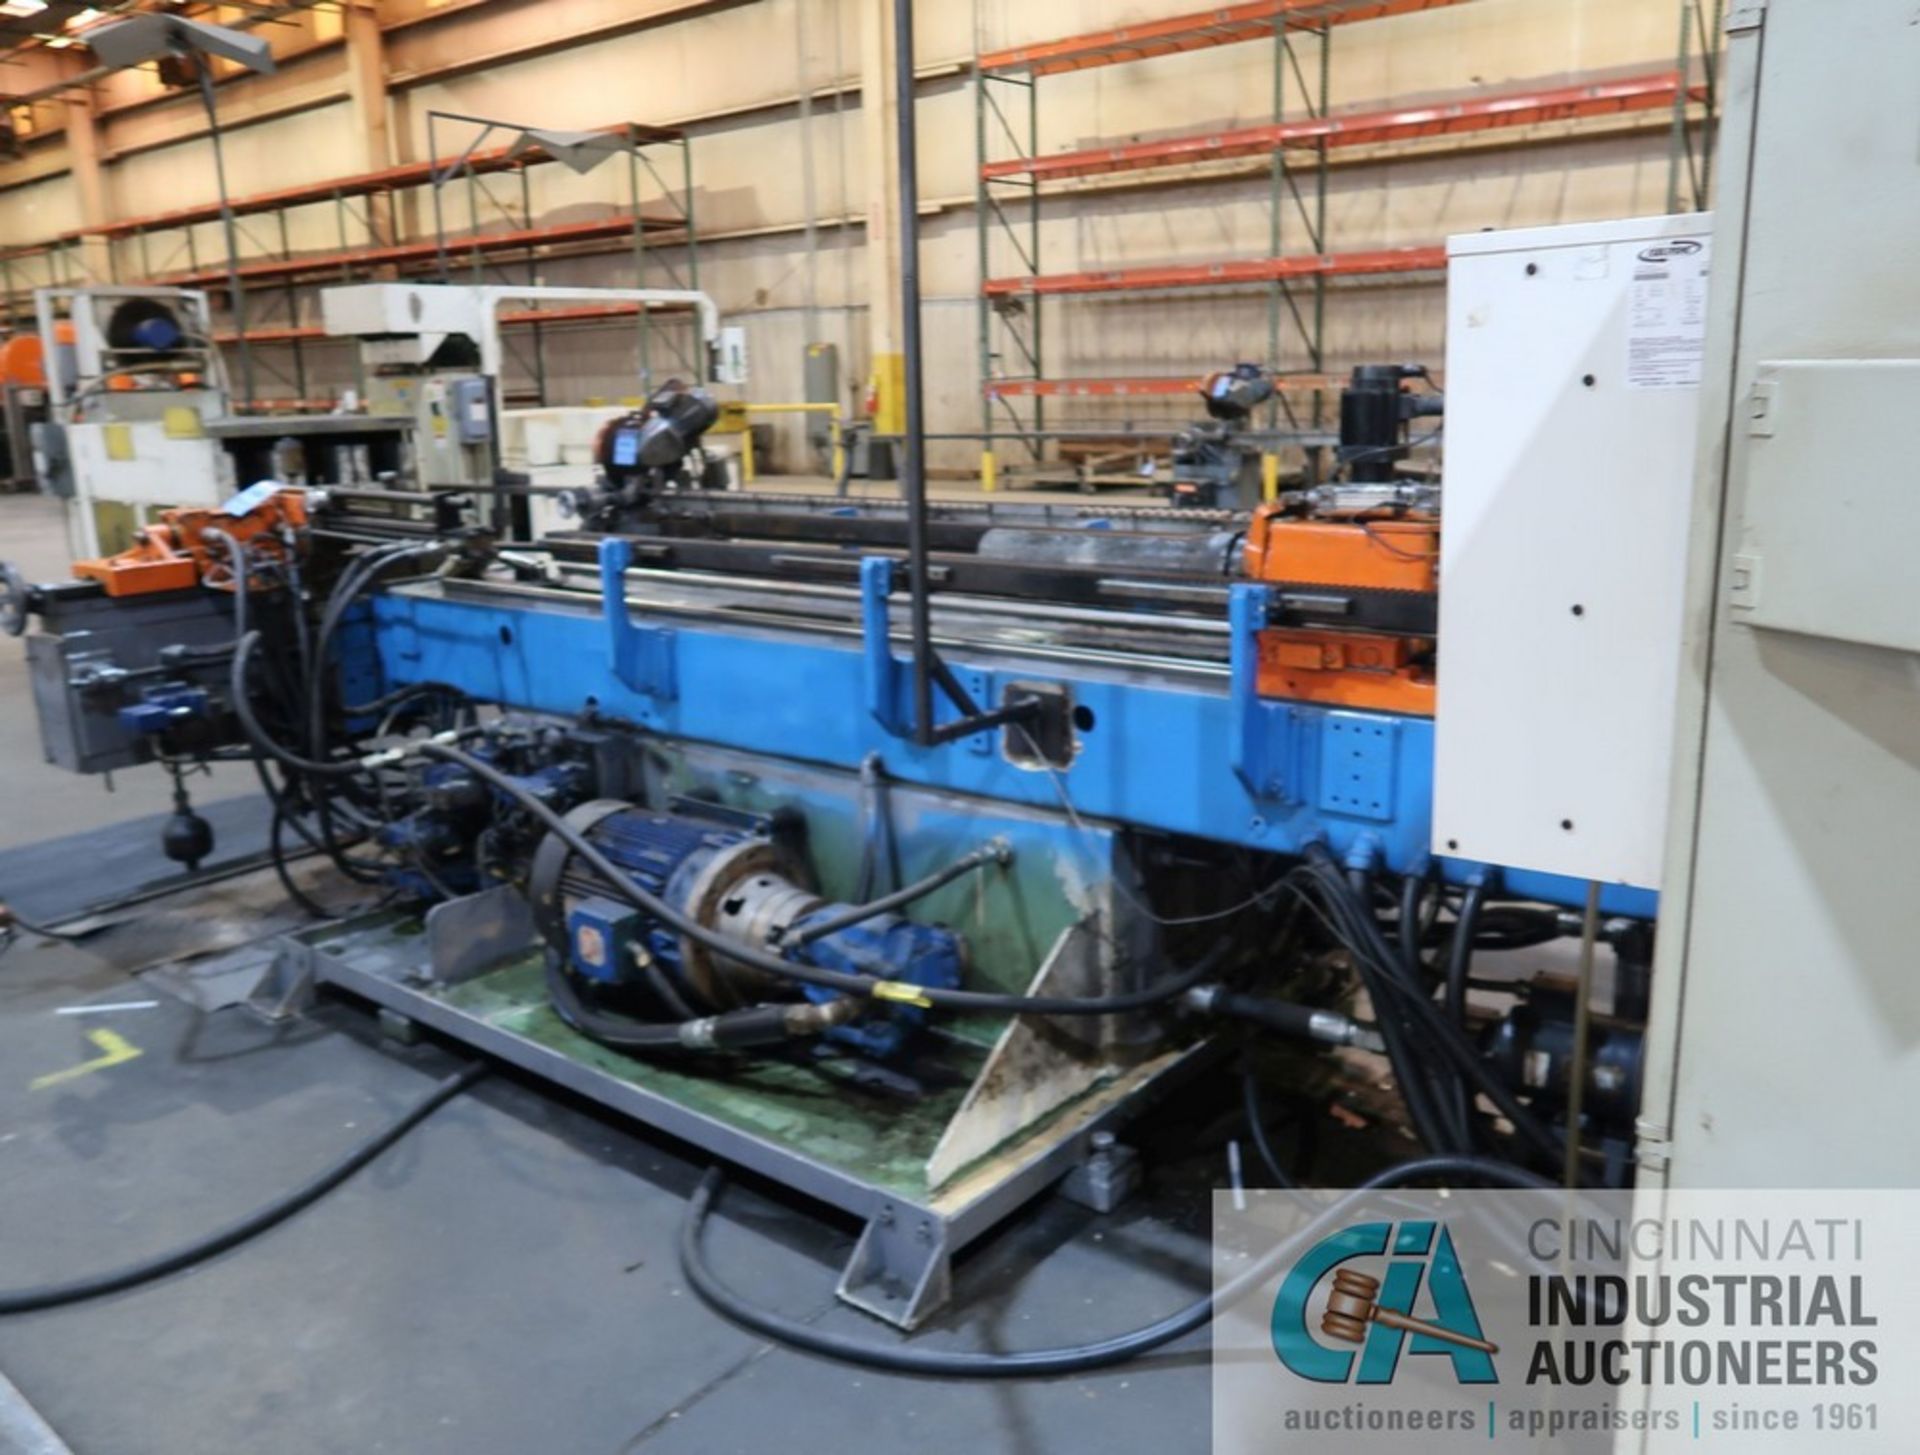 3" ADDISON MODEL DB76-TB TRAVELING BOOST CNC HYDRAULIC TUBE BENDER; S/N 10035, ASSET NO. ABCC-7, - Image 7 of 17